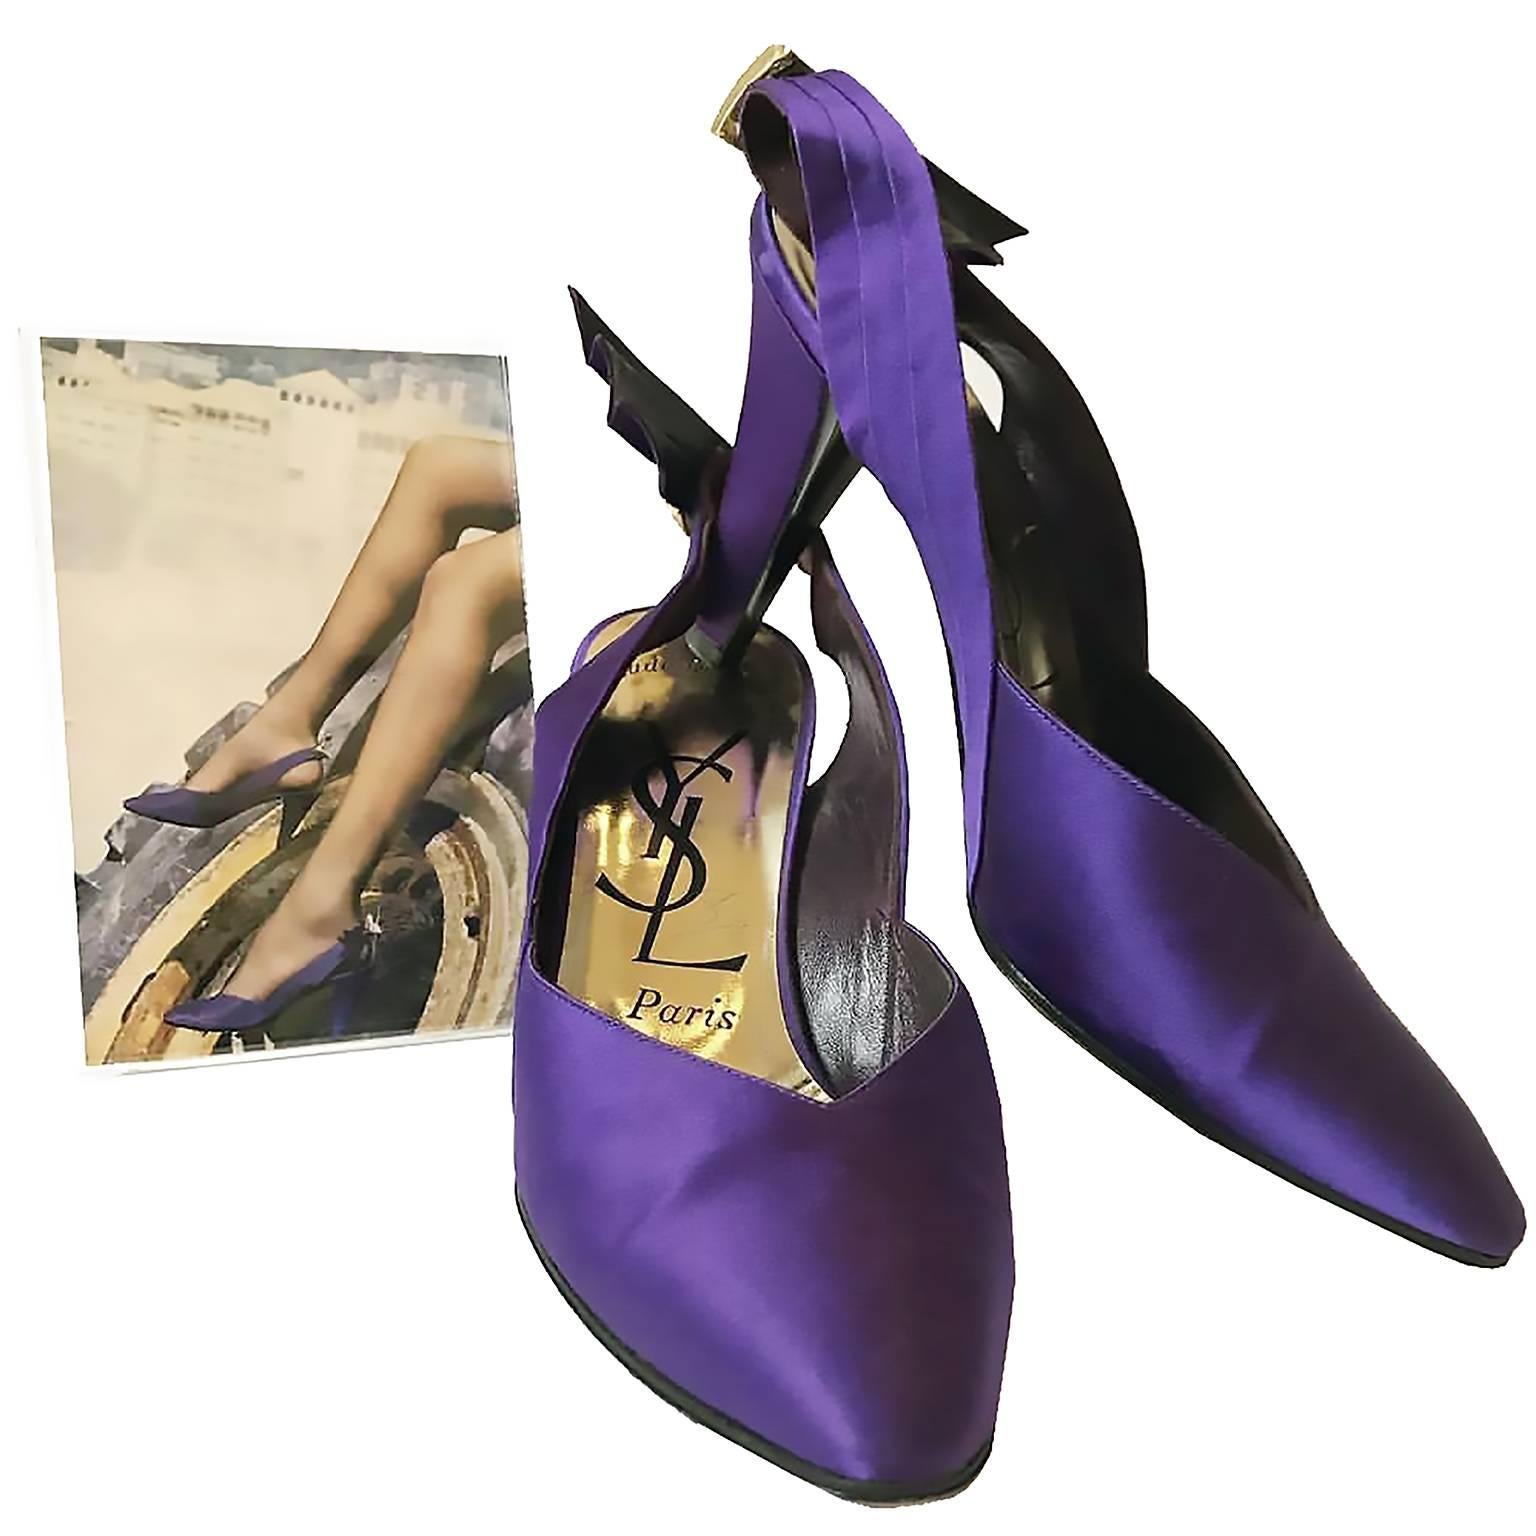 These fabulous documented vintage purple satin YSL shoes have pretty rhinestone buckles and a 